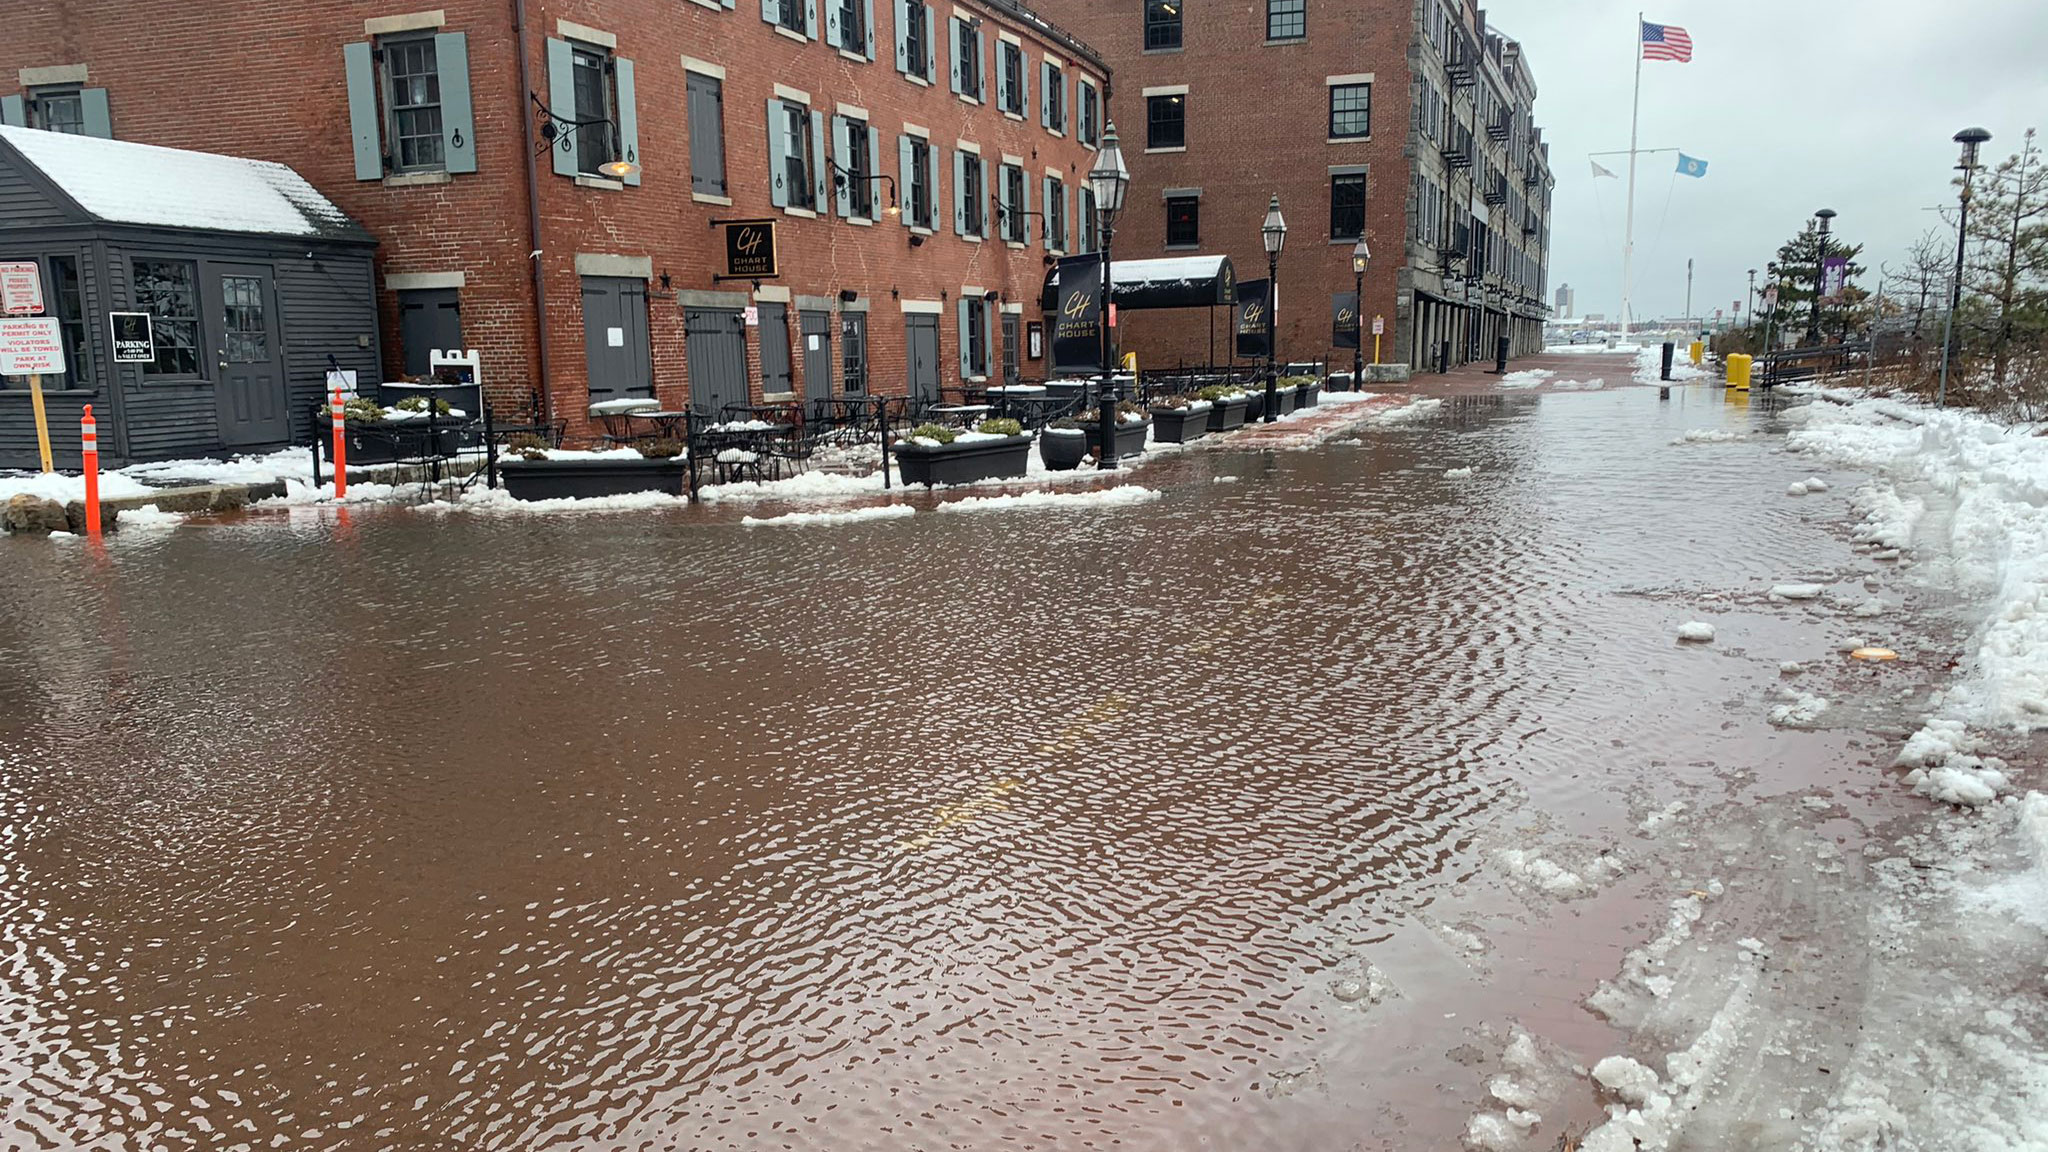 Live Updates Flooding Reported Along Mass Coastline Due To High Tides Boston 25 News